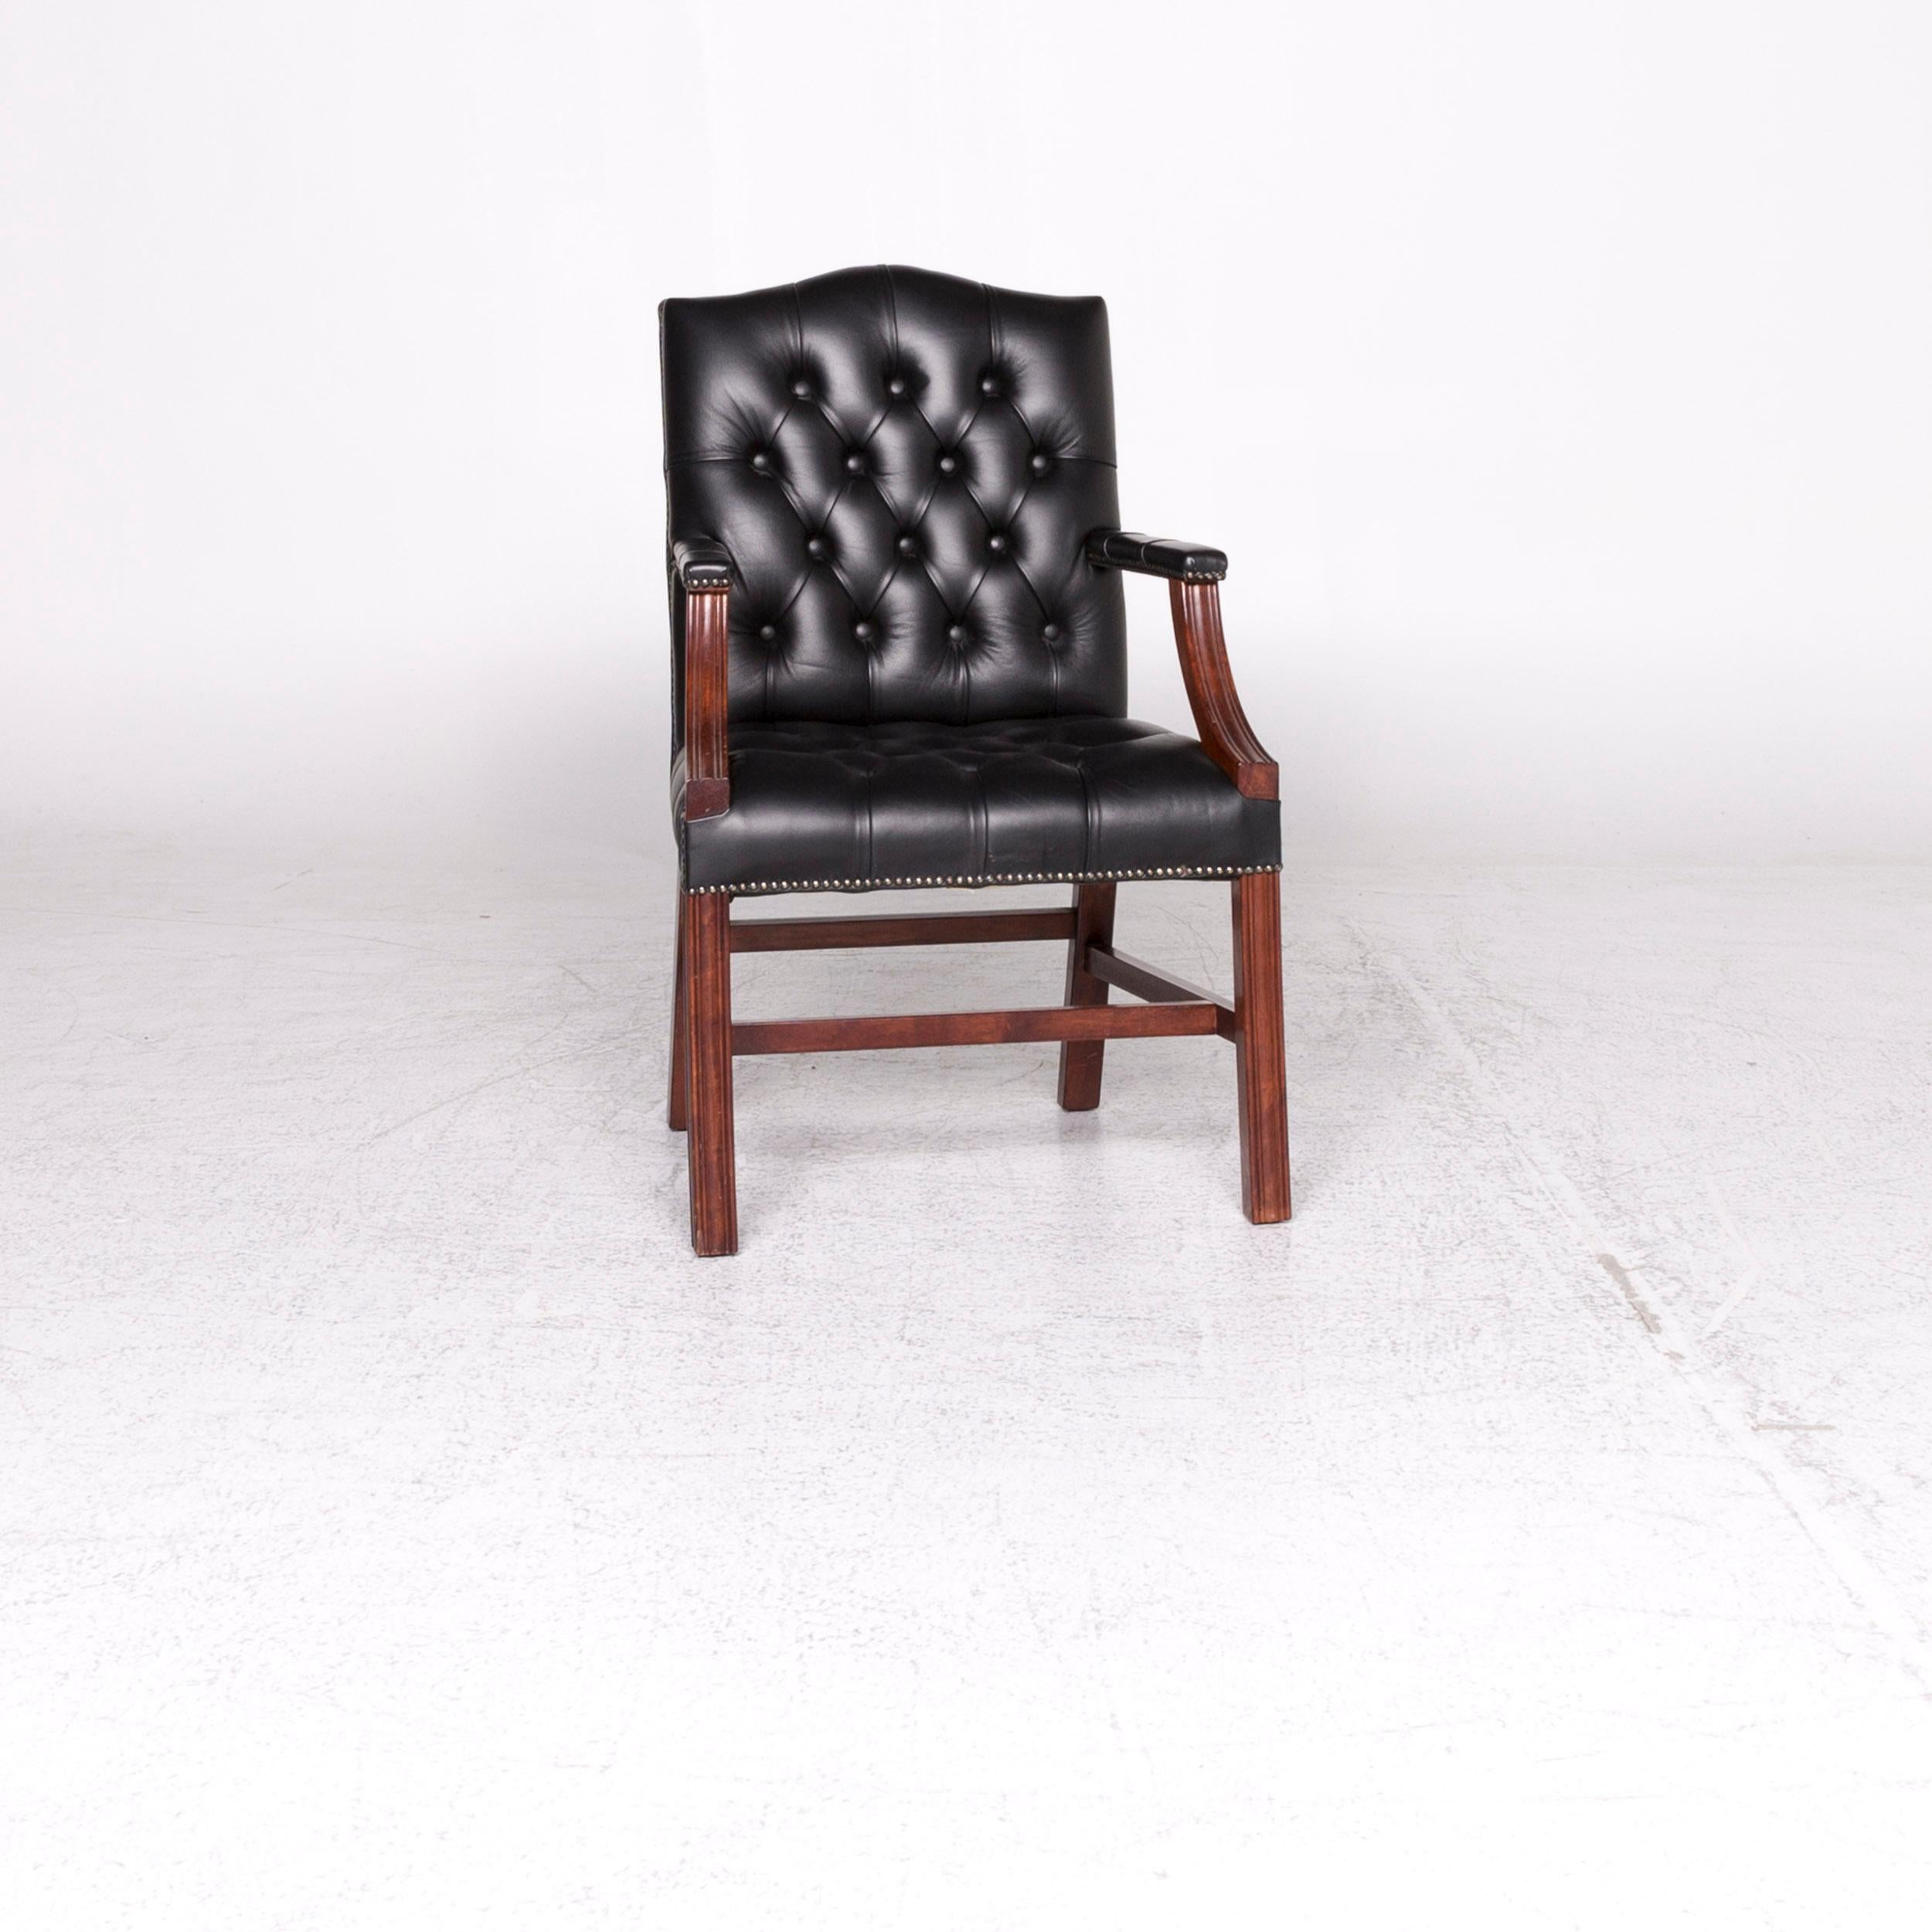 We bring to you a Chesterfield leather armchair black chair.
 
 Product measurements in centimeters:
 
 depth 63
 width 62
 height 100
 seat-height 49
 rest-height 69
 seat-depth 44
 seat-width 50
 back-height 51.
  